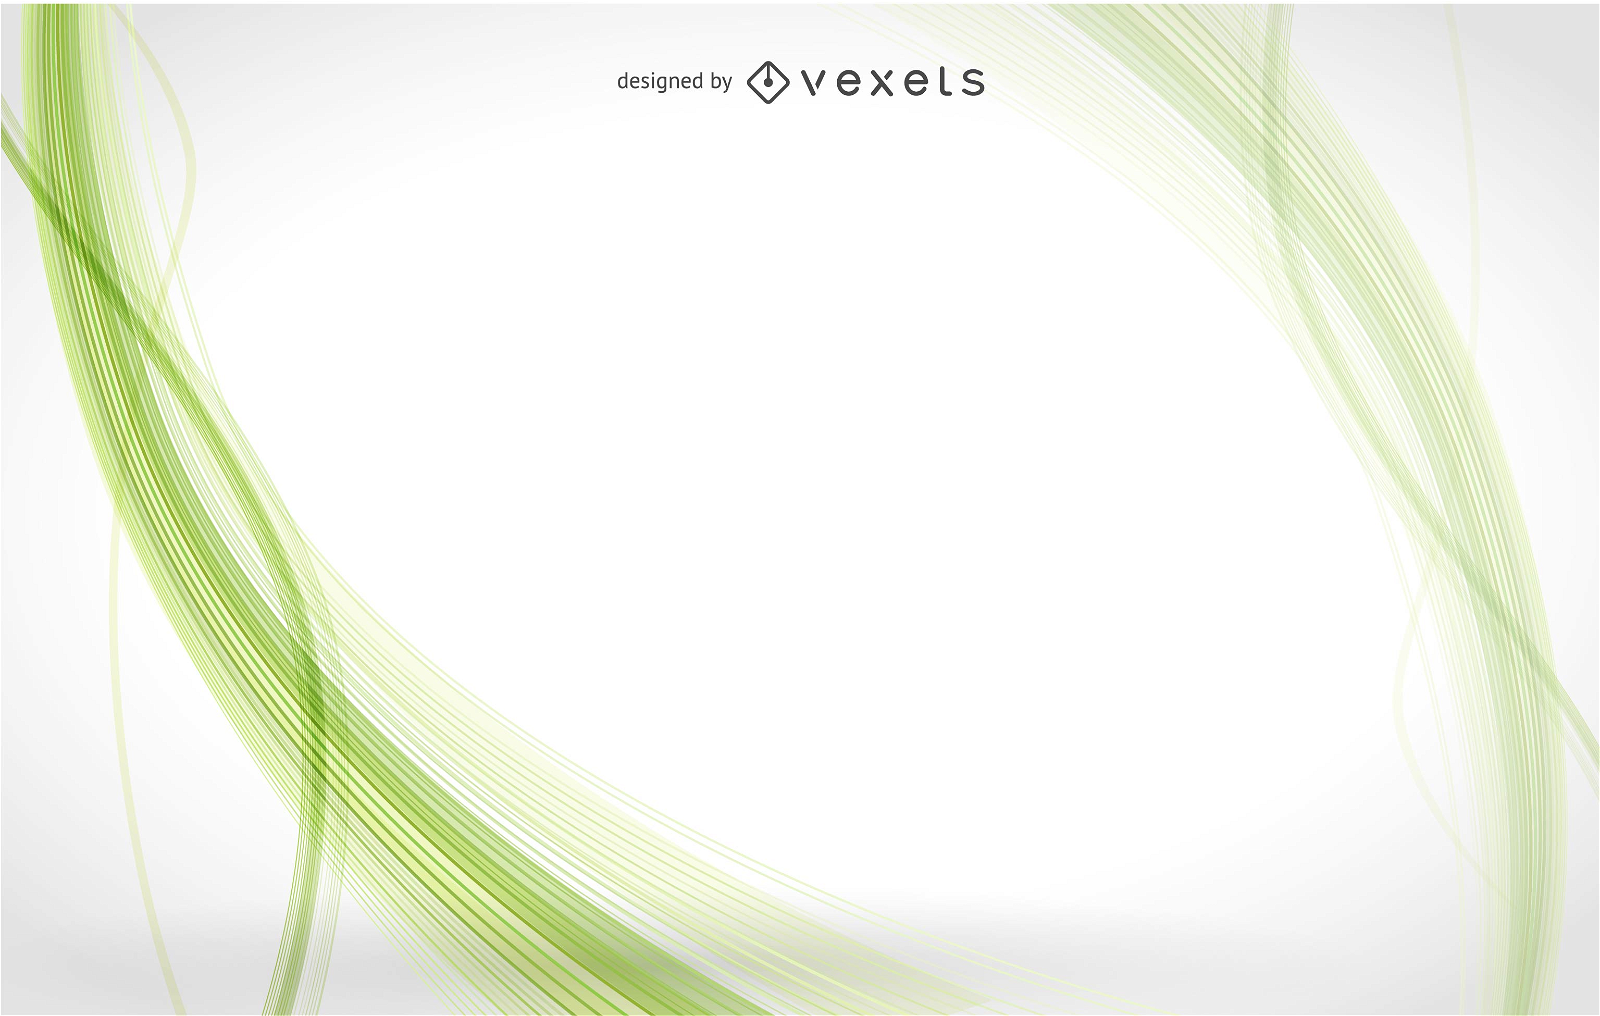 Green Abstract Background Vector